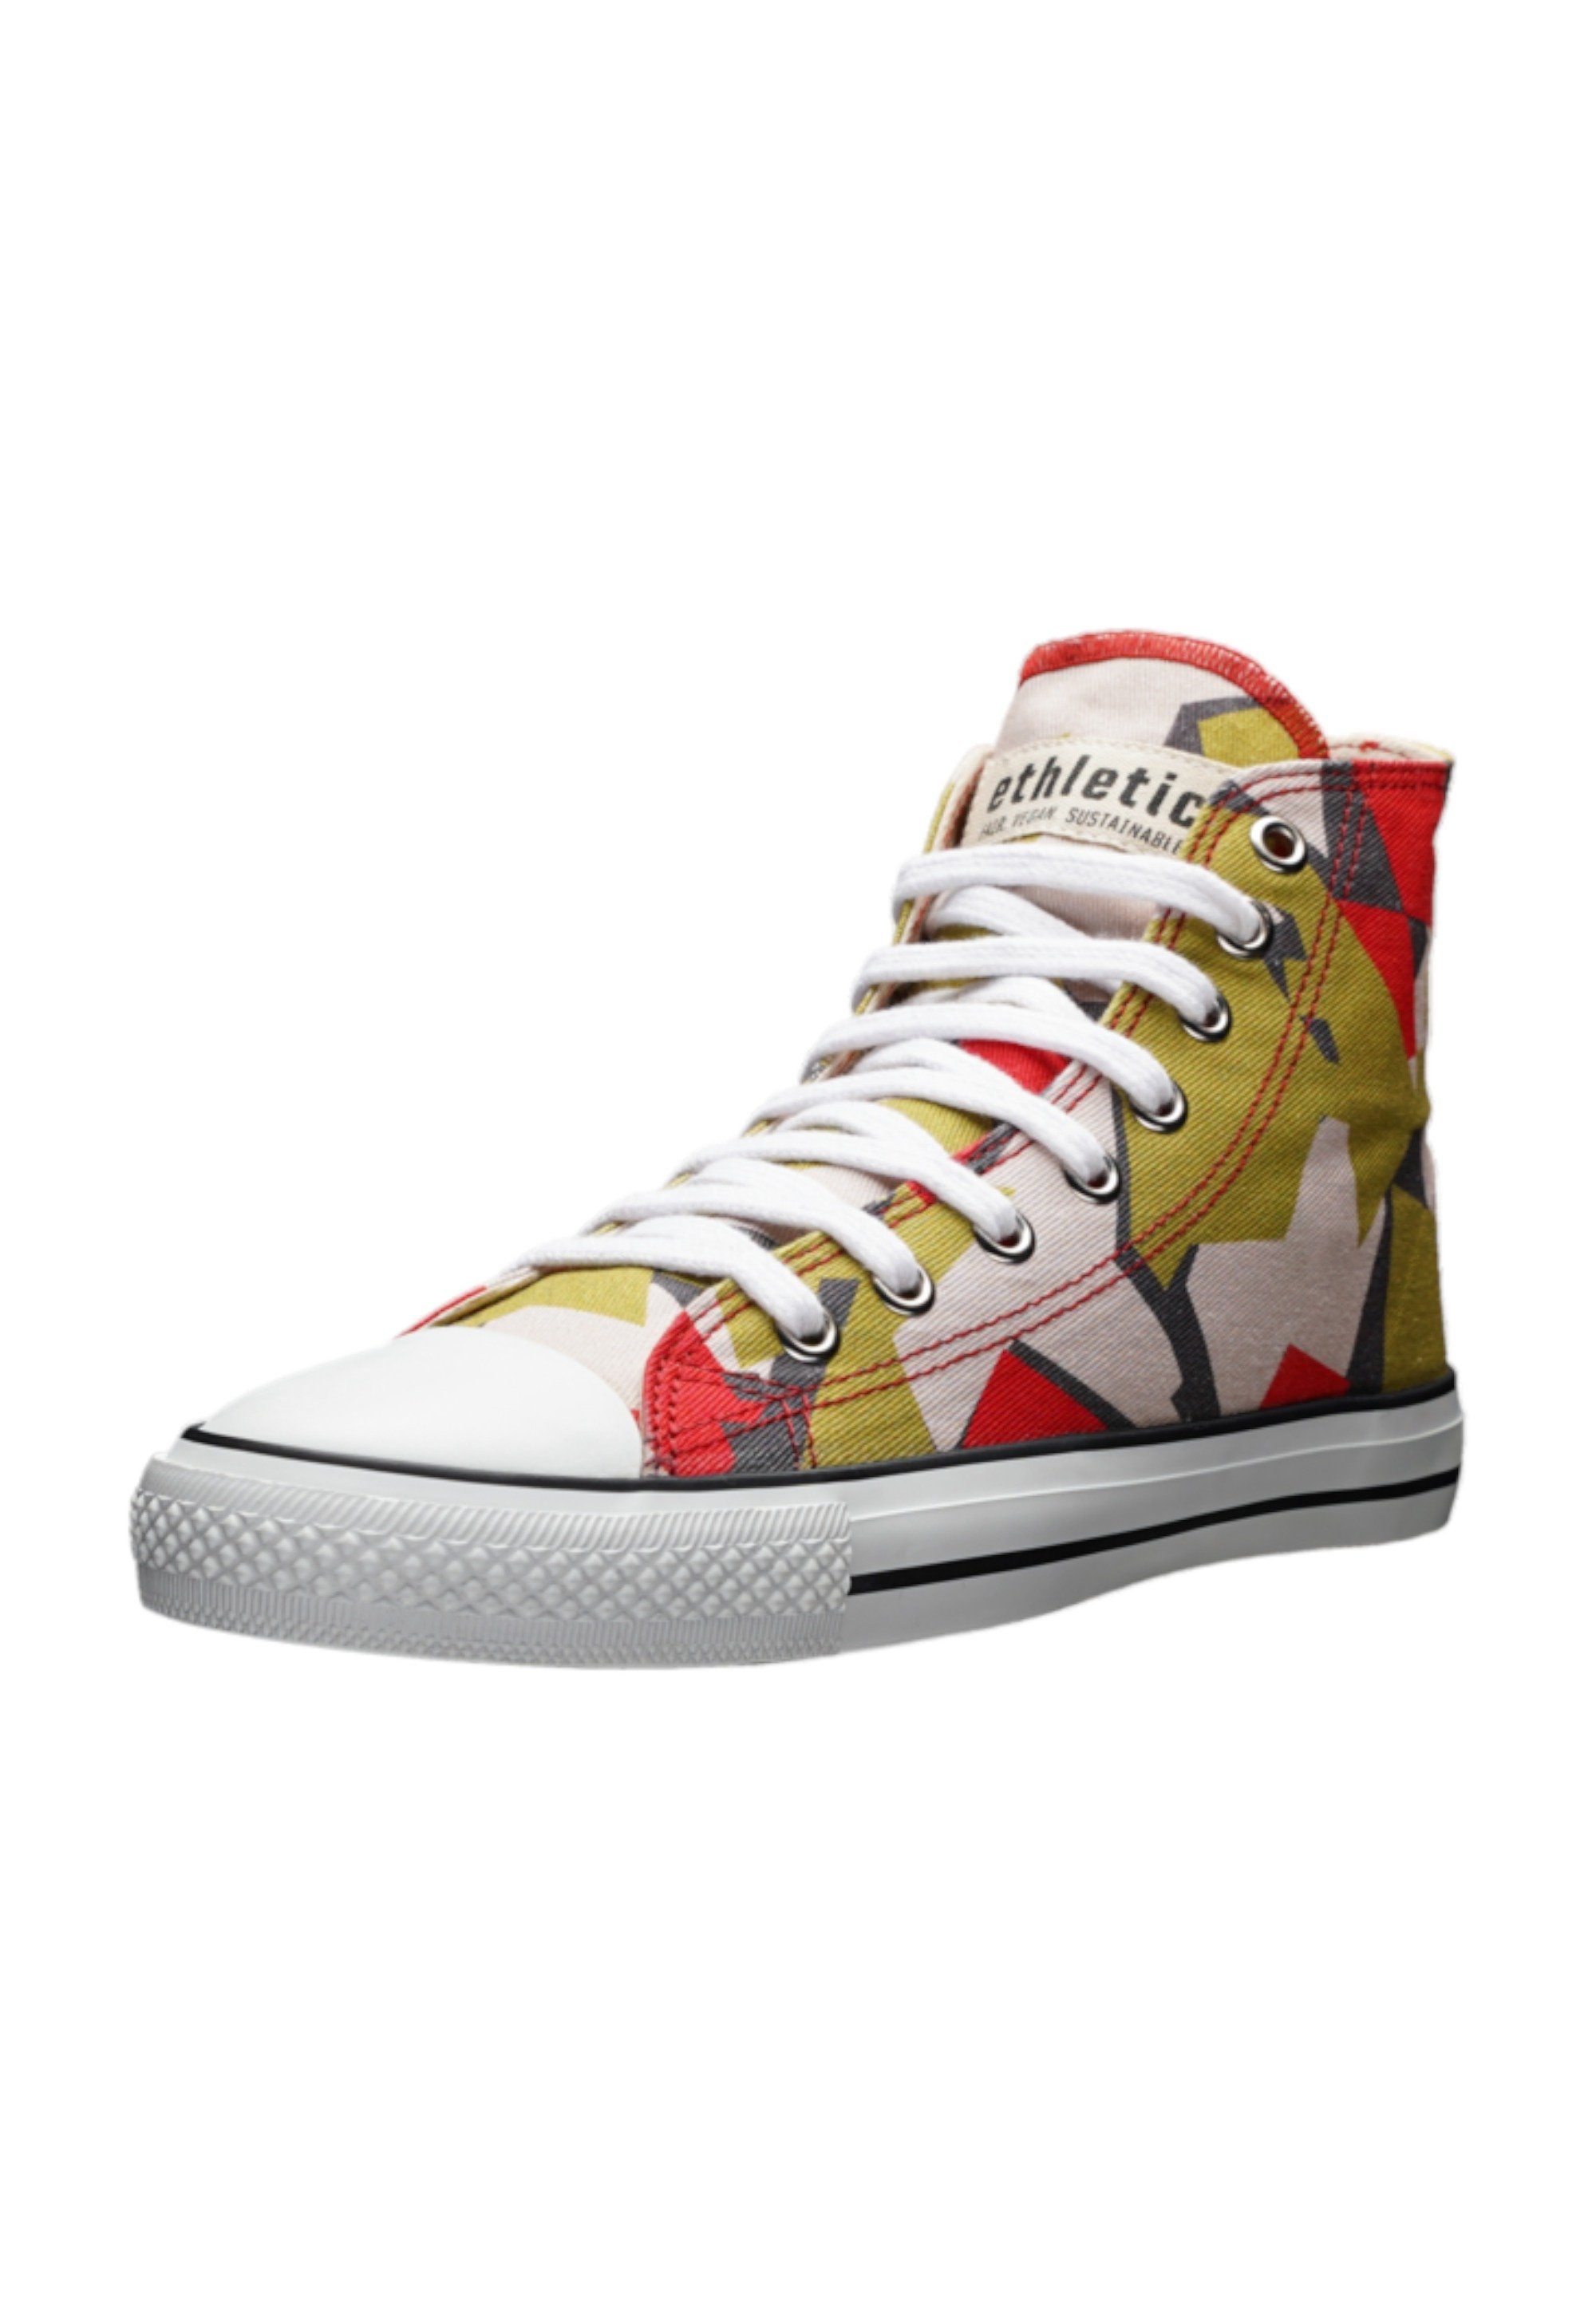 Just Fairtrade Cut Camou White ETHLETIC - Sneaker Red Produkt Hi White Cap